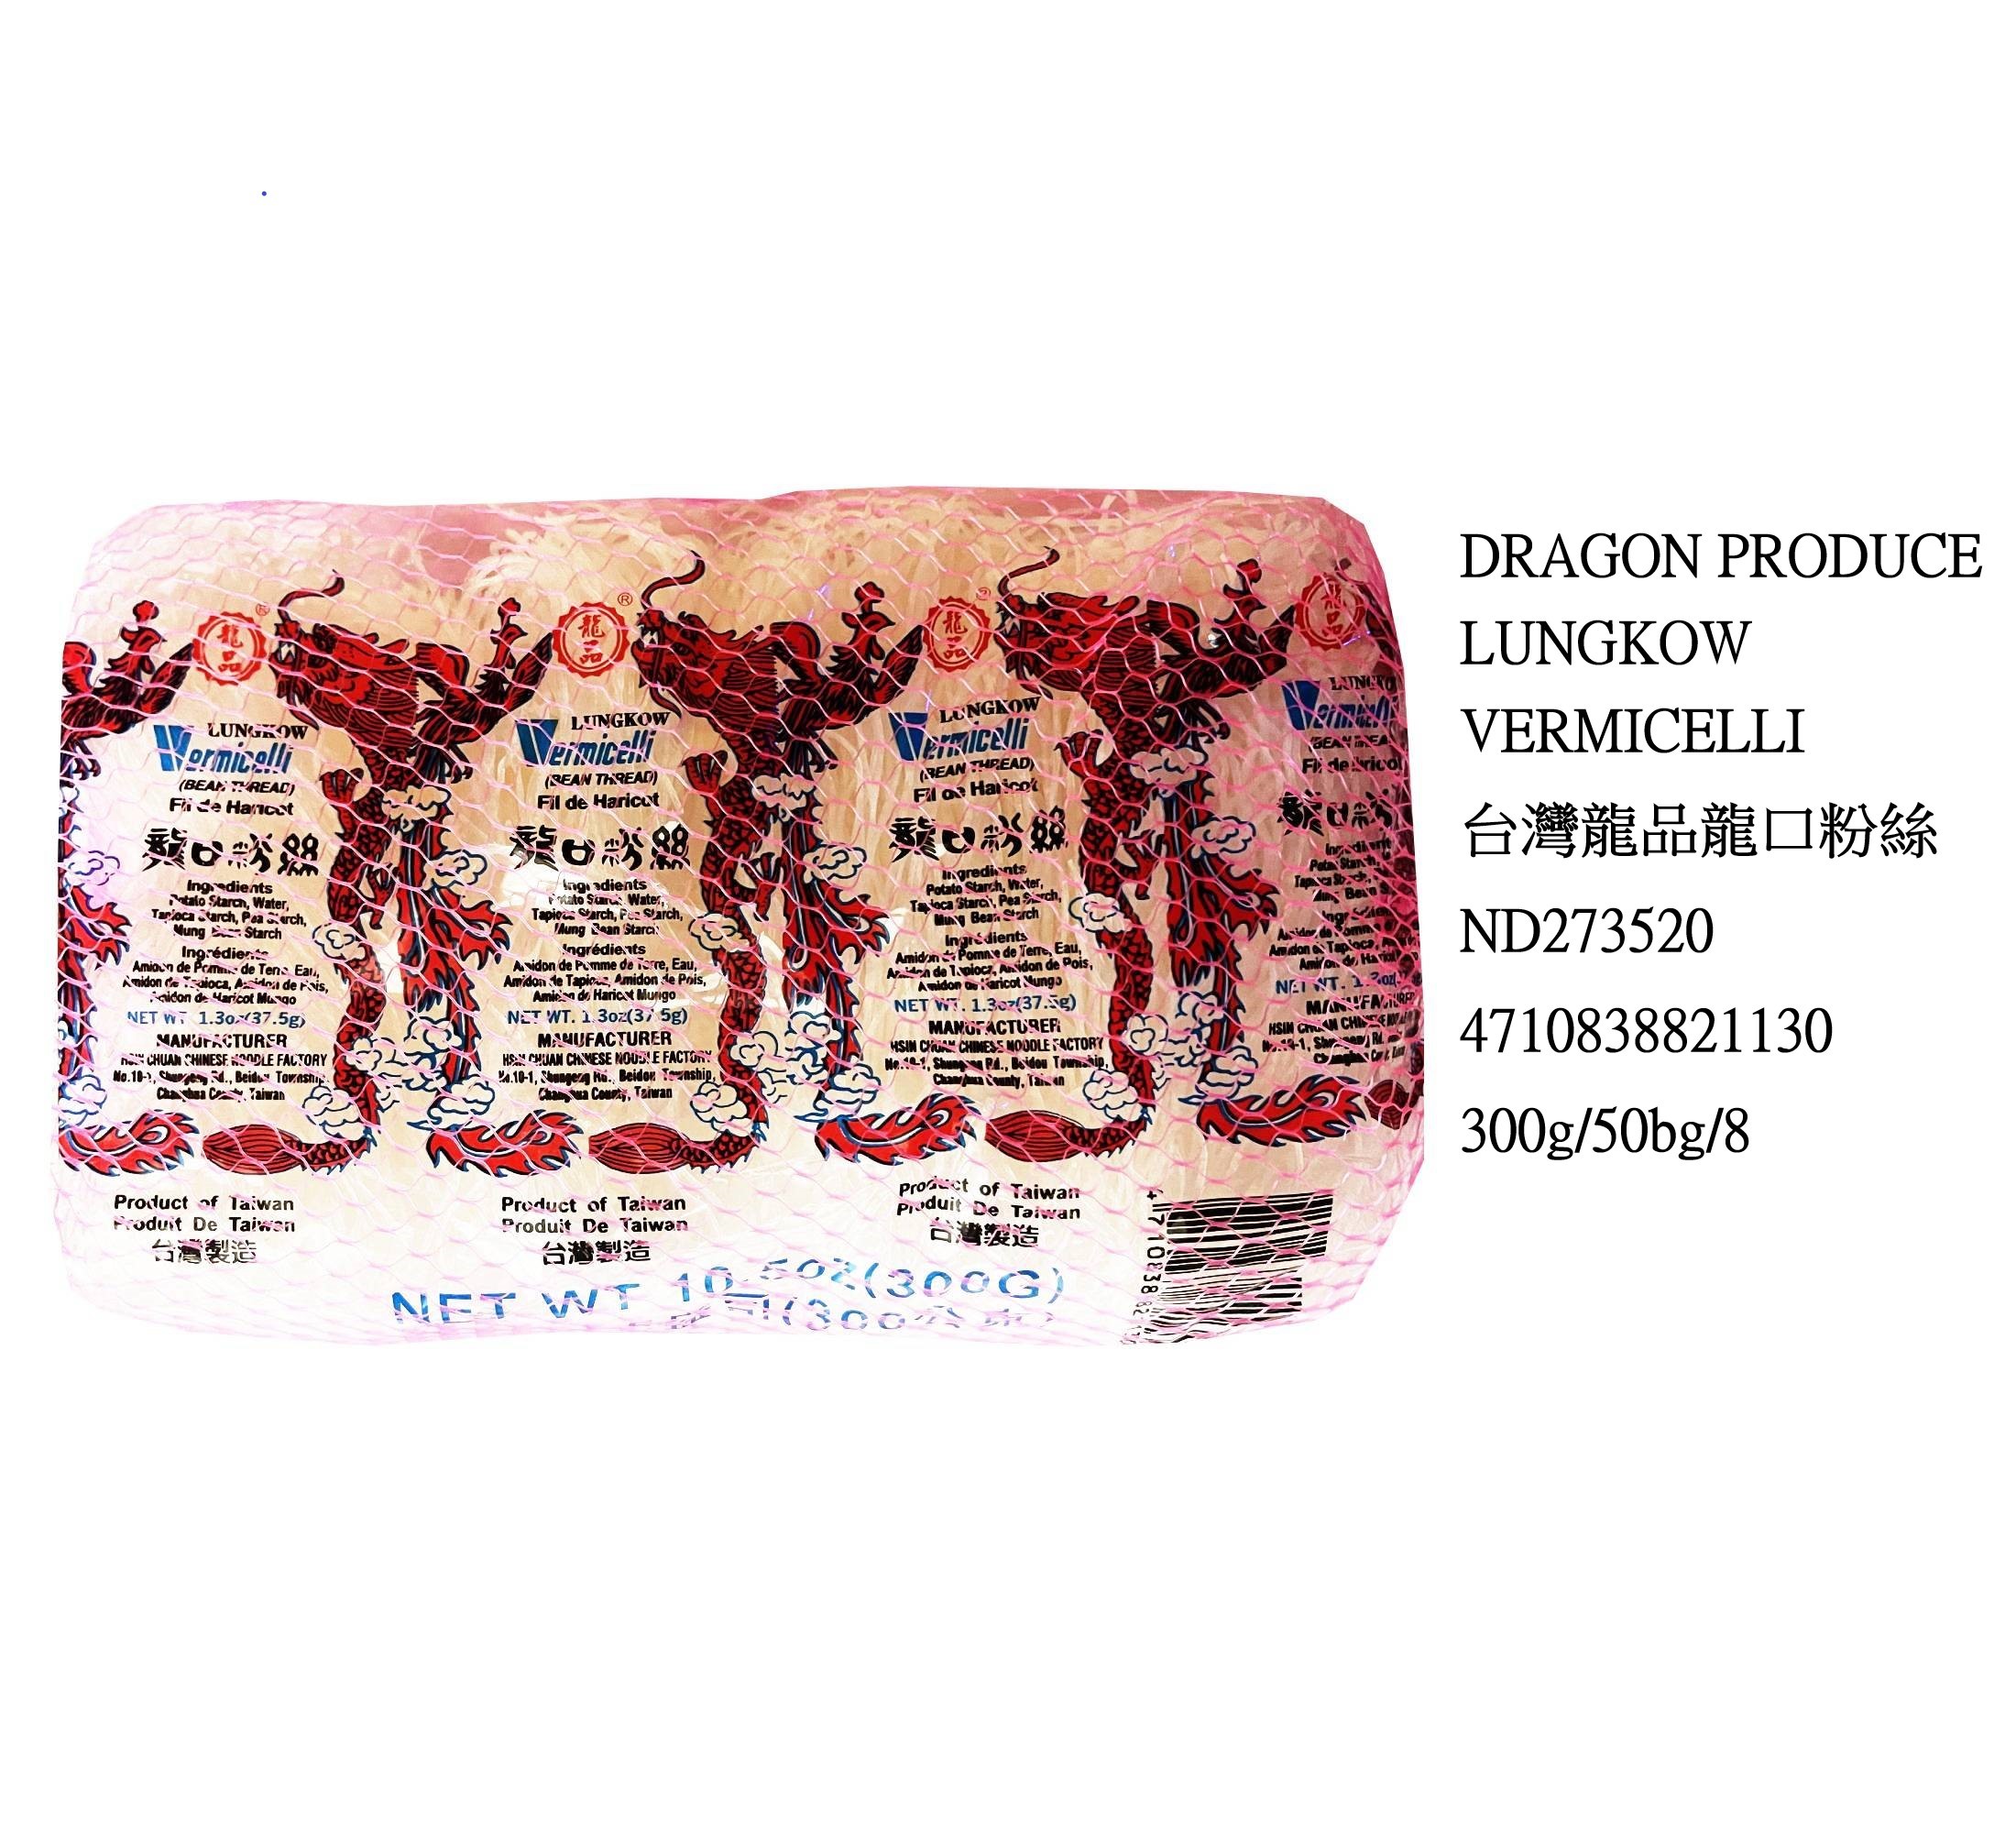 DRAGON PRODUCE LUNGKOW VERMICELLI ND273520